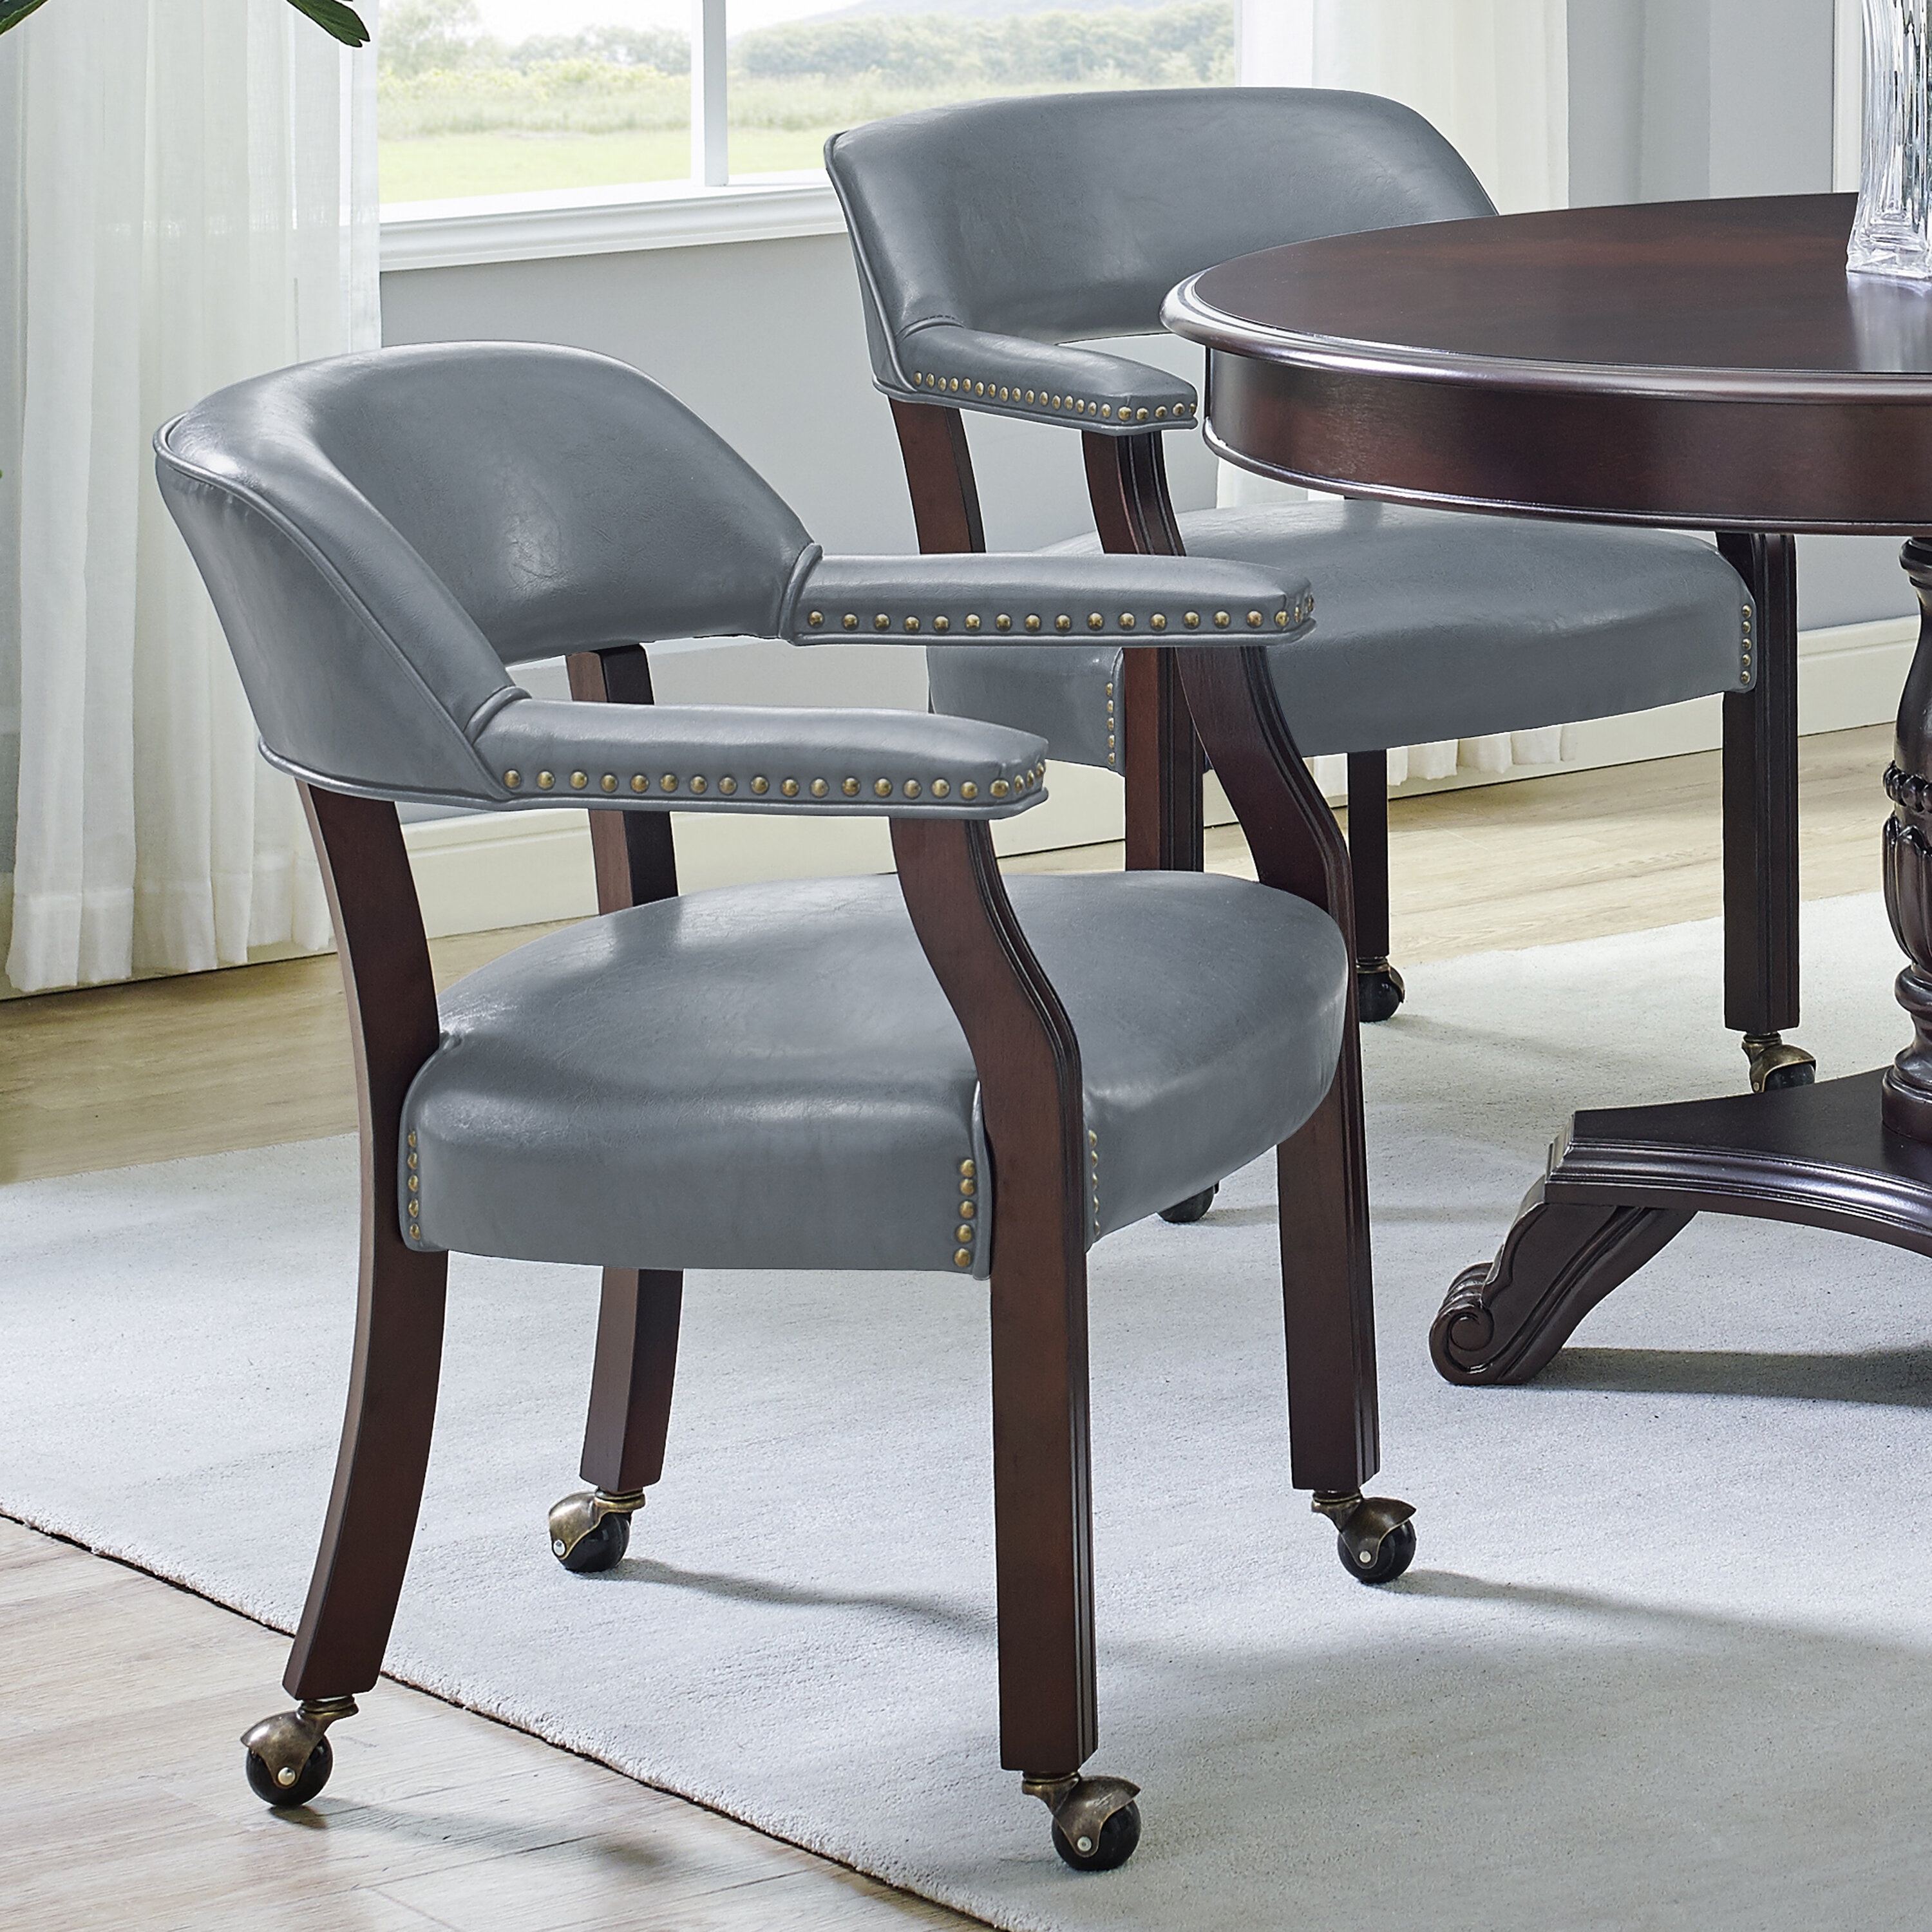 Dining Chairs With Casters Visualhunt